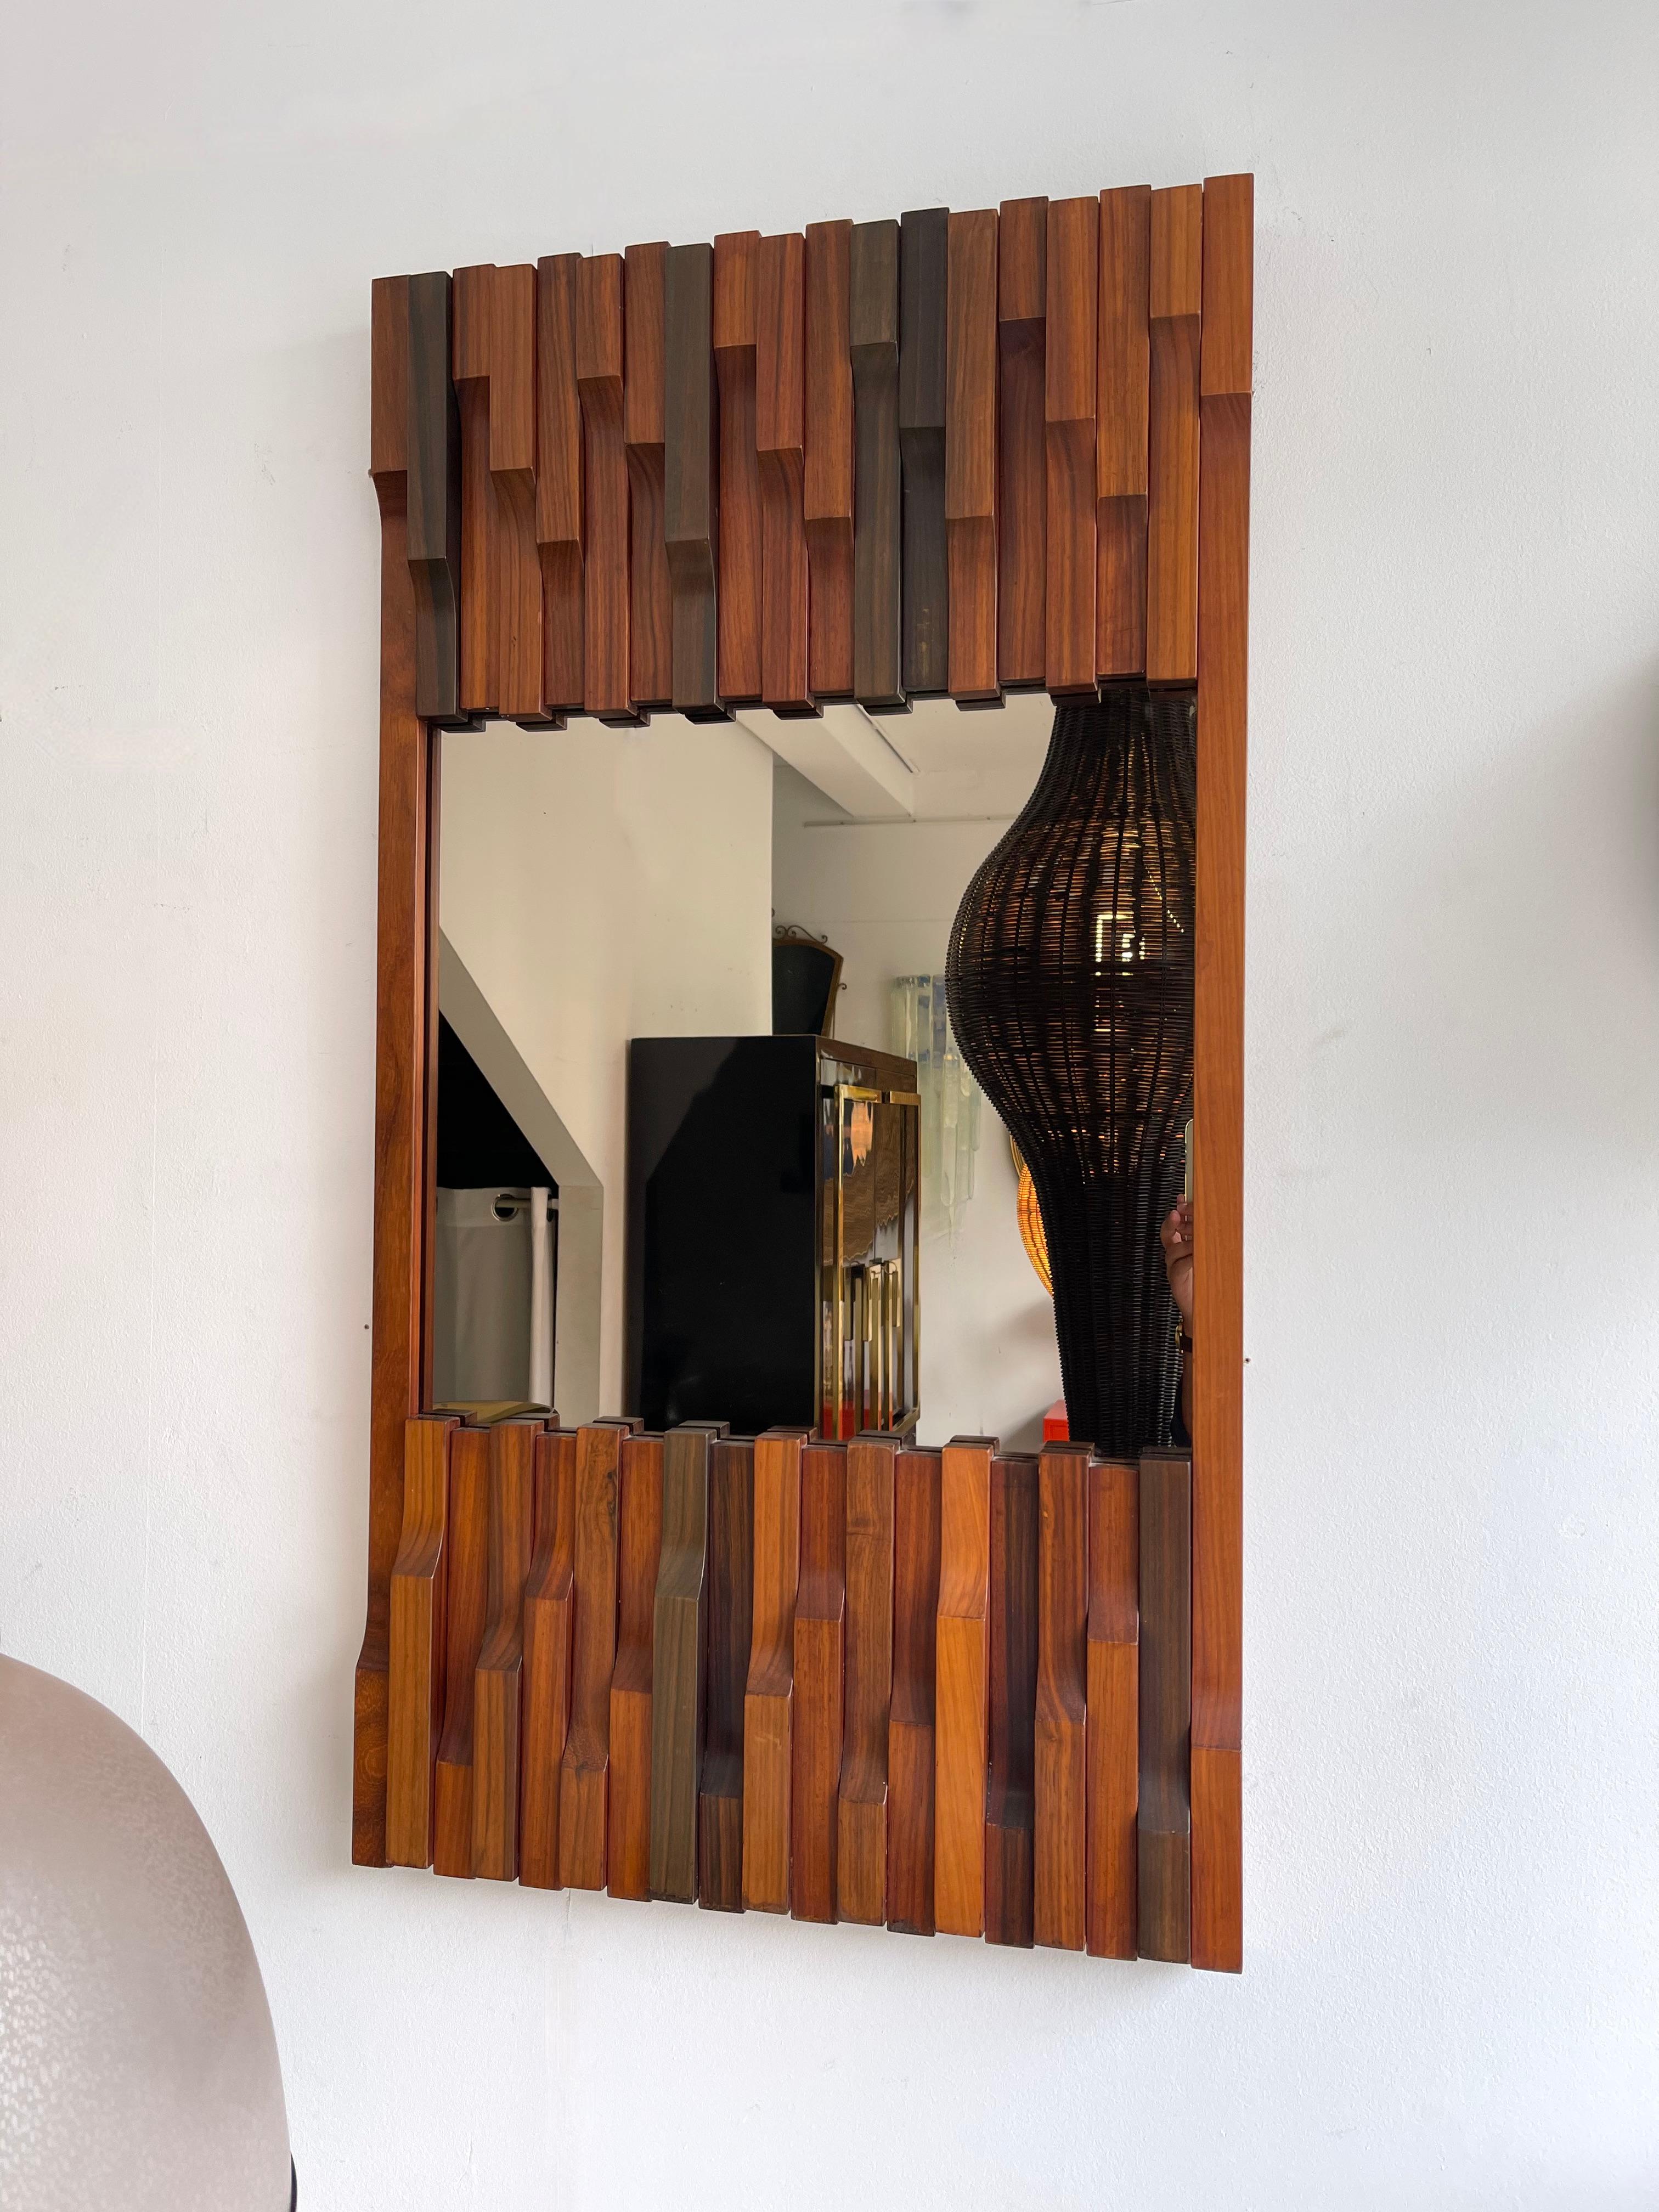 Wood sculpted wall mirror by Luciano Frigerio.